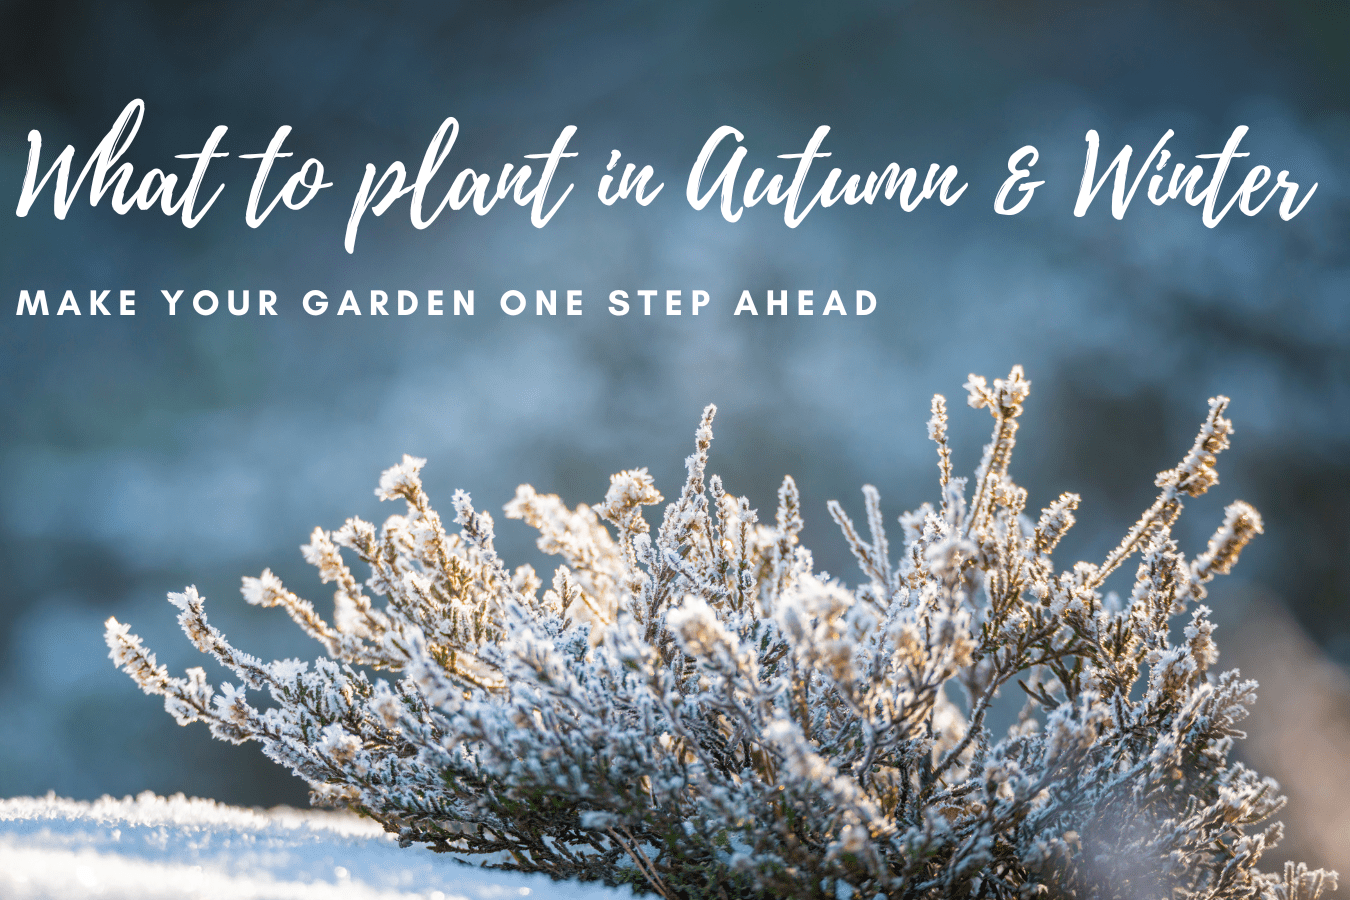 What to plant in Autumn & Winter: Make your garden one step ahead.